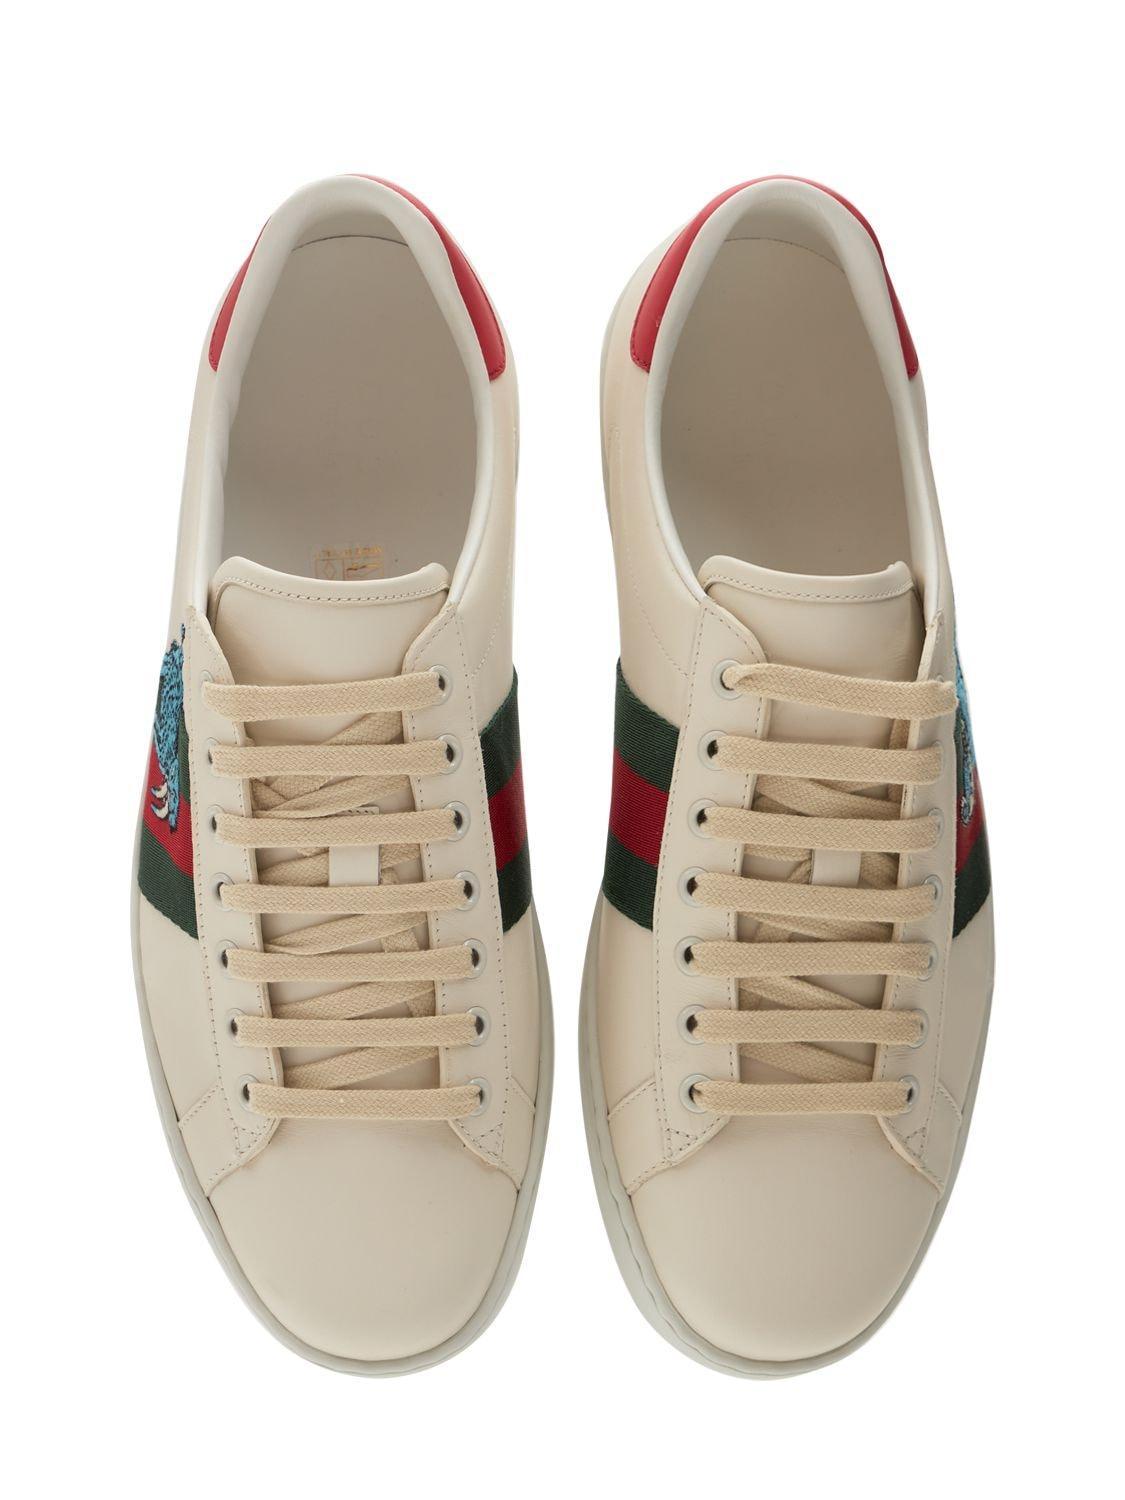 Gucci Leather X Freya Hartas Ace Low-top Sneakers for Men - Save 